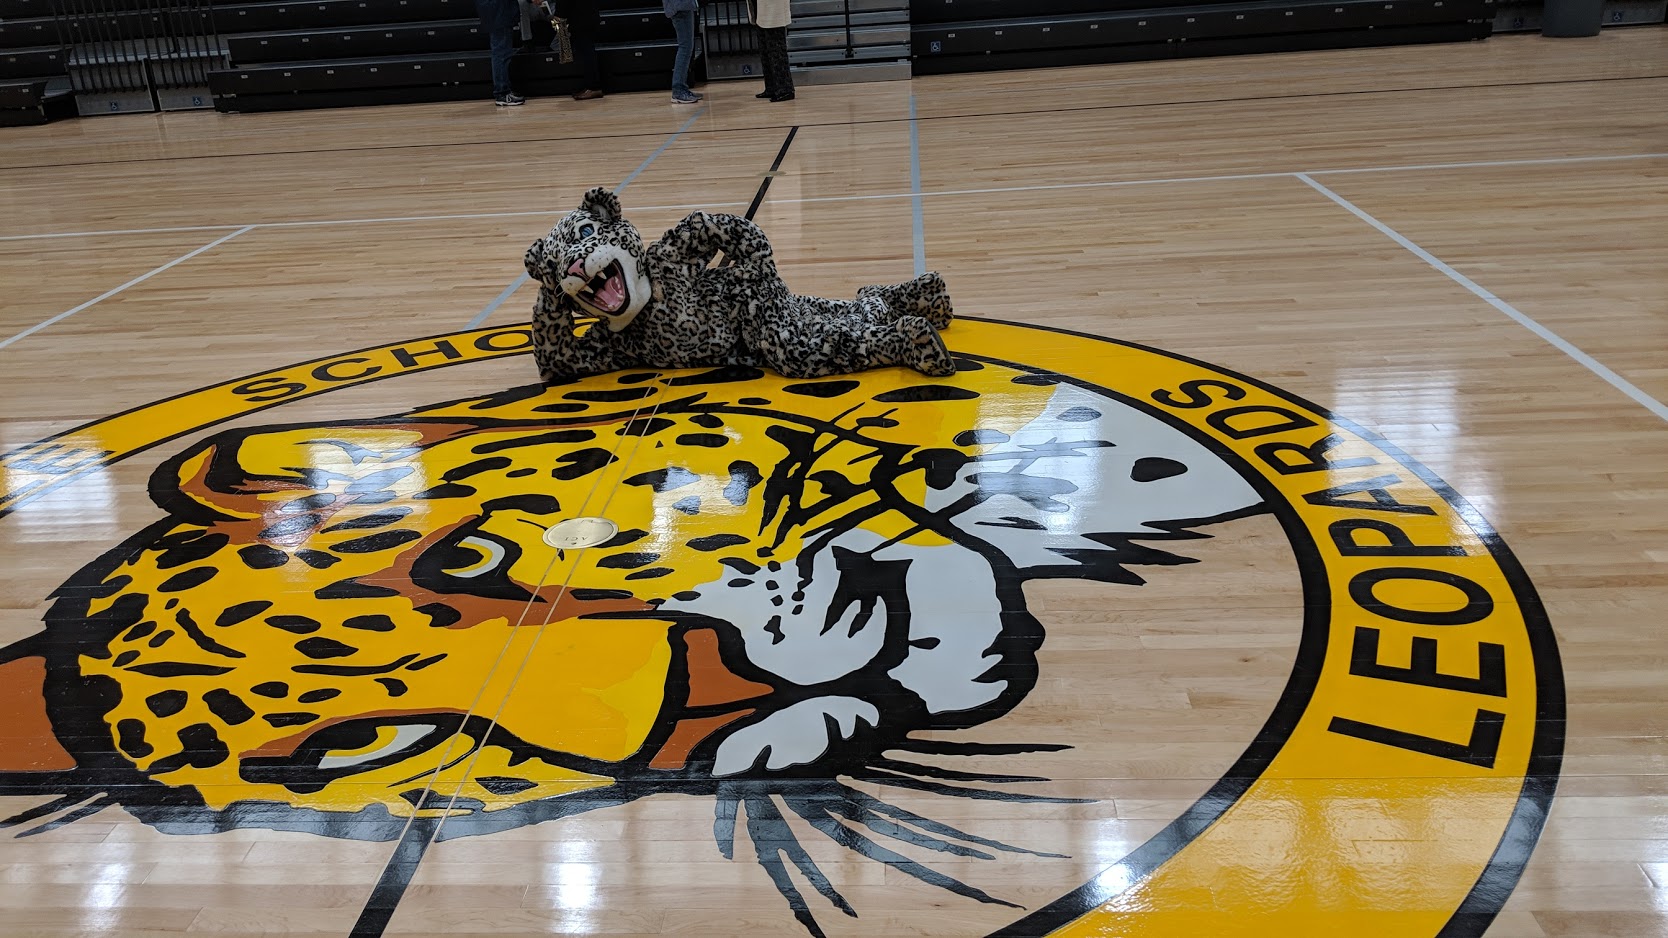 Gym Floor and Mascot image